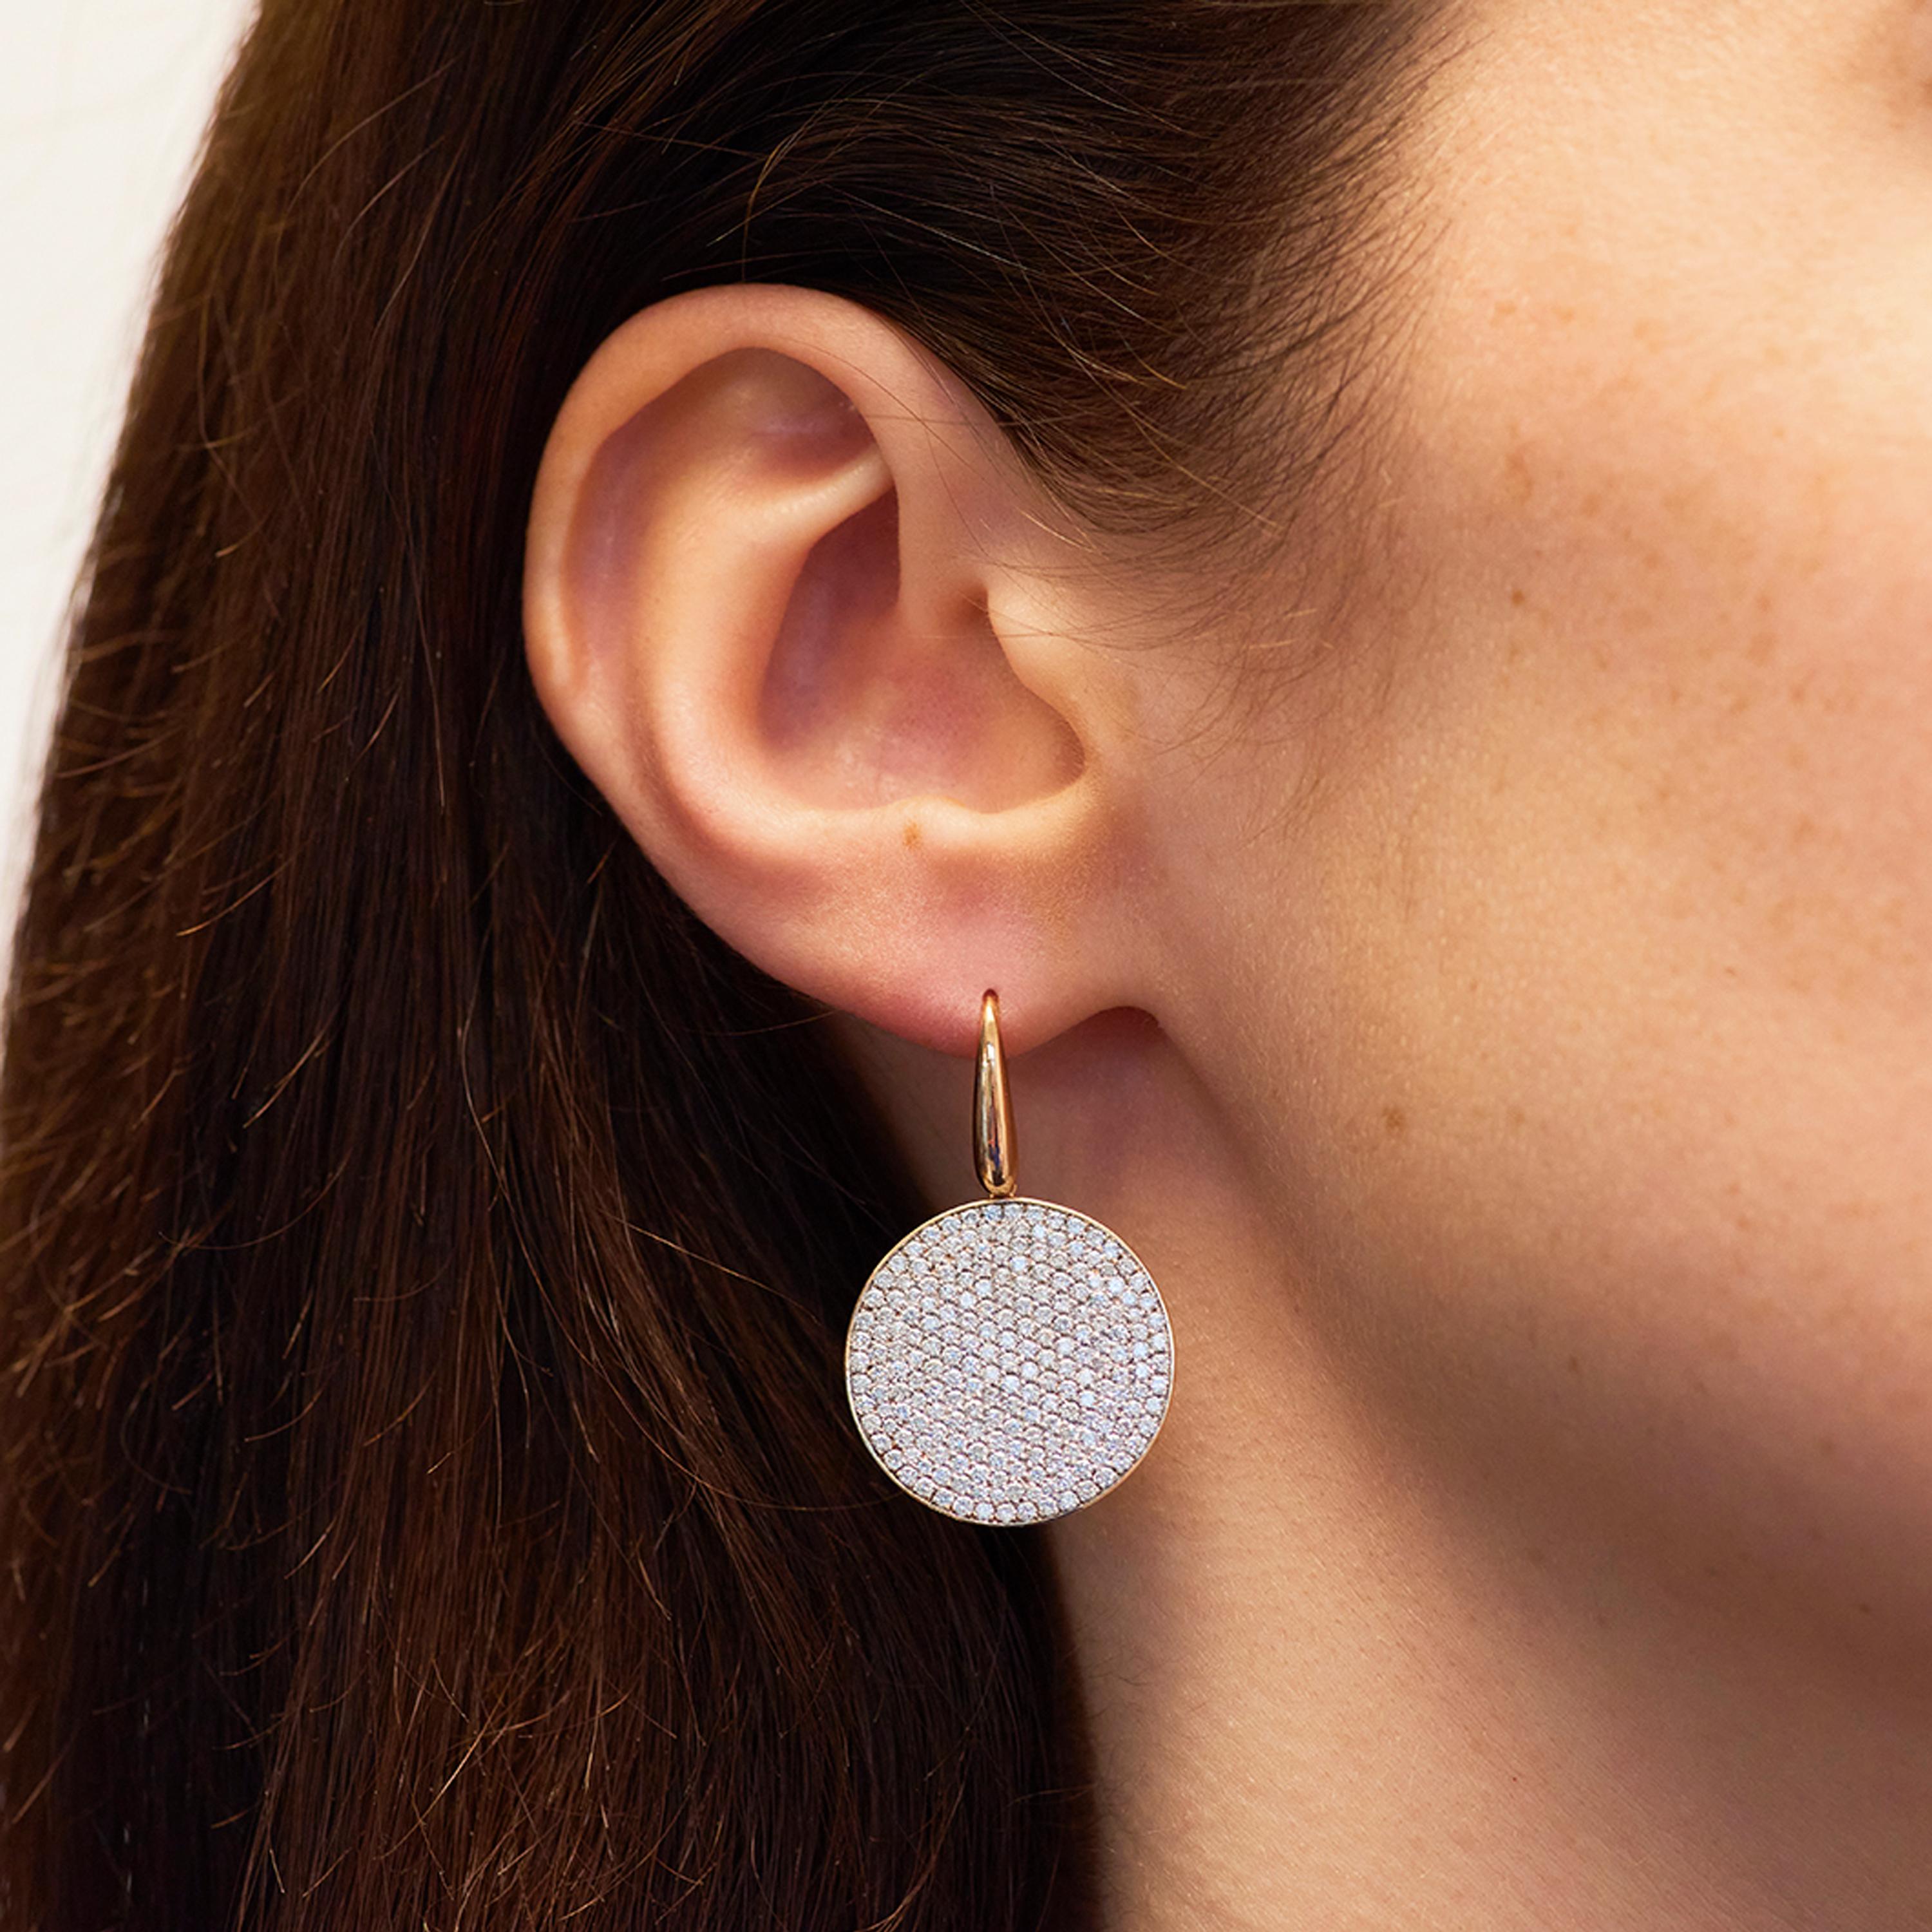 Francesca Villa's statement earrings are crafted in 18 karat rose gold earrings with diamonds (1.64ct), enamel, fragment of Englishwoman’s Domestic Magazine. Asymmetric and playful, these earrings reflect Francesca Villa's witty sense of humour and